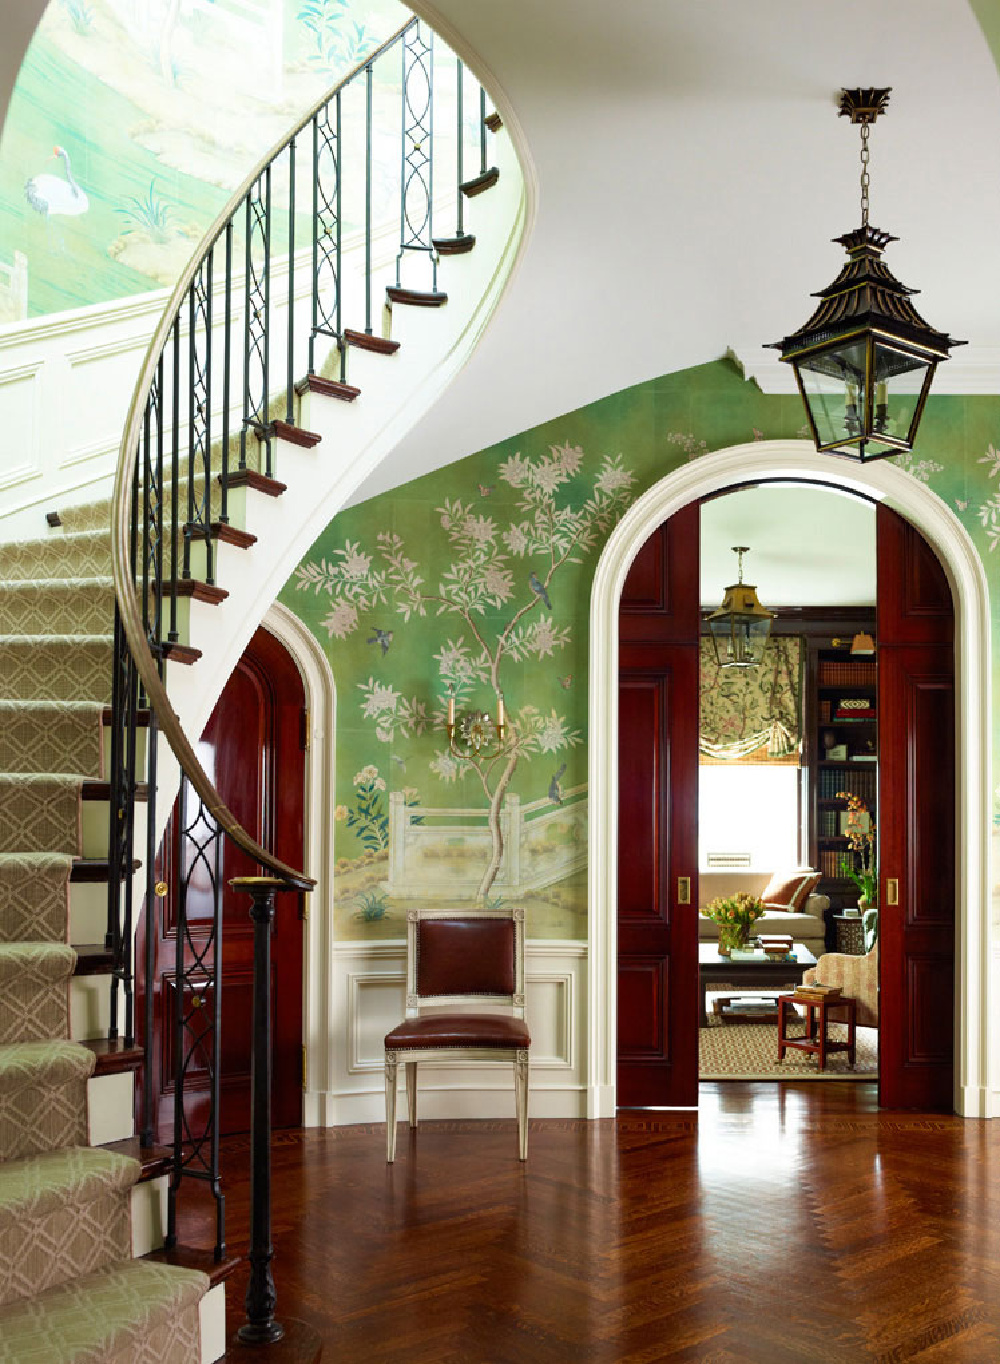 Green plays a starring role in this Ashley Whittaker designed interior with elegant staircase, wallpaper with birds in trees, and arched doorway. #traditionalstyle #greeninterior